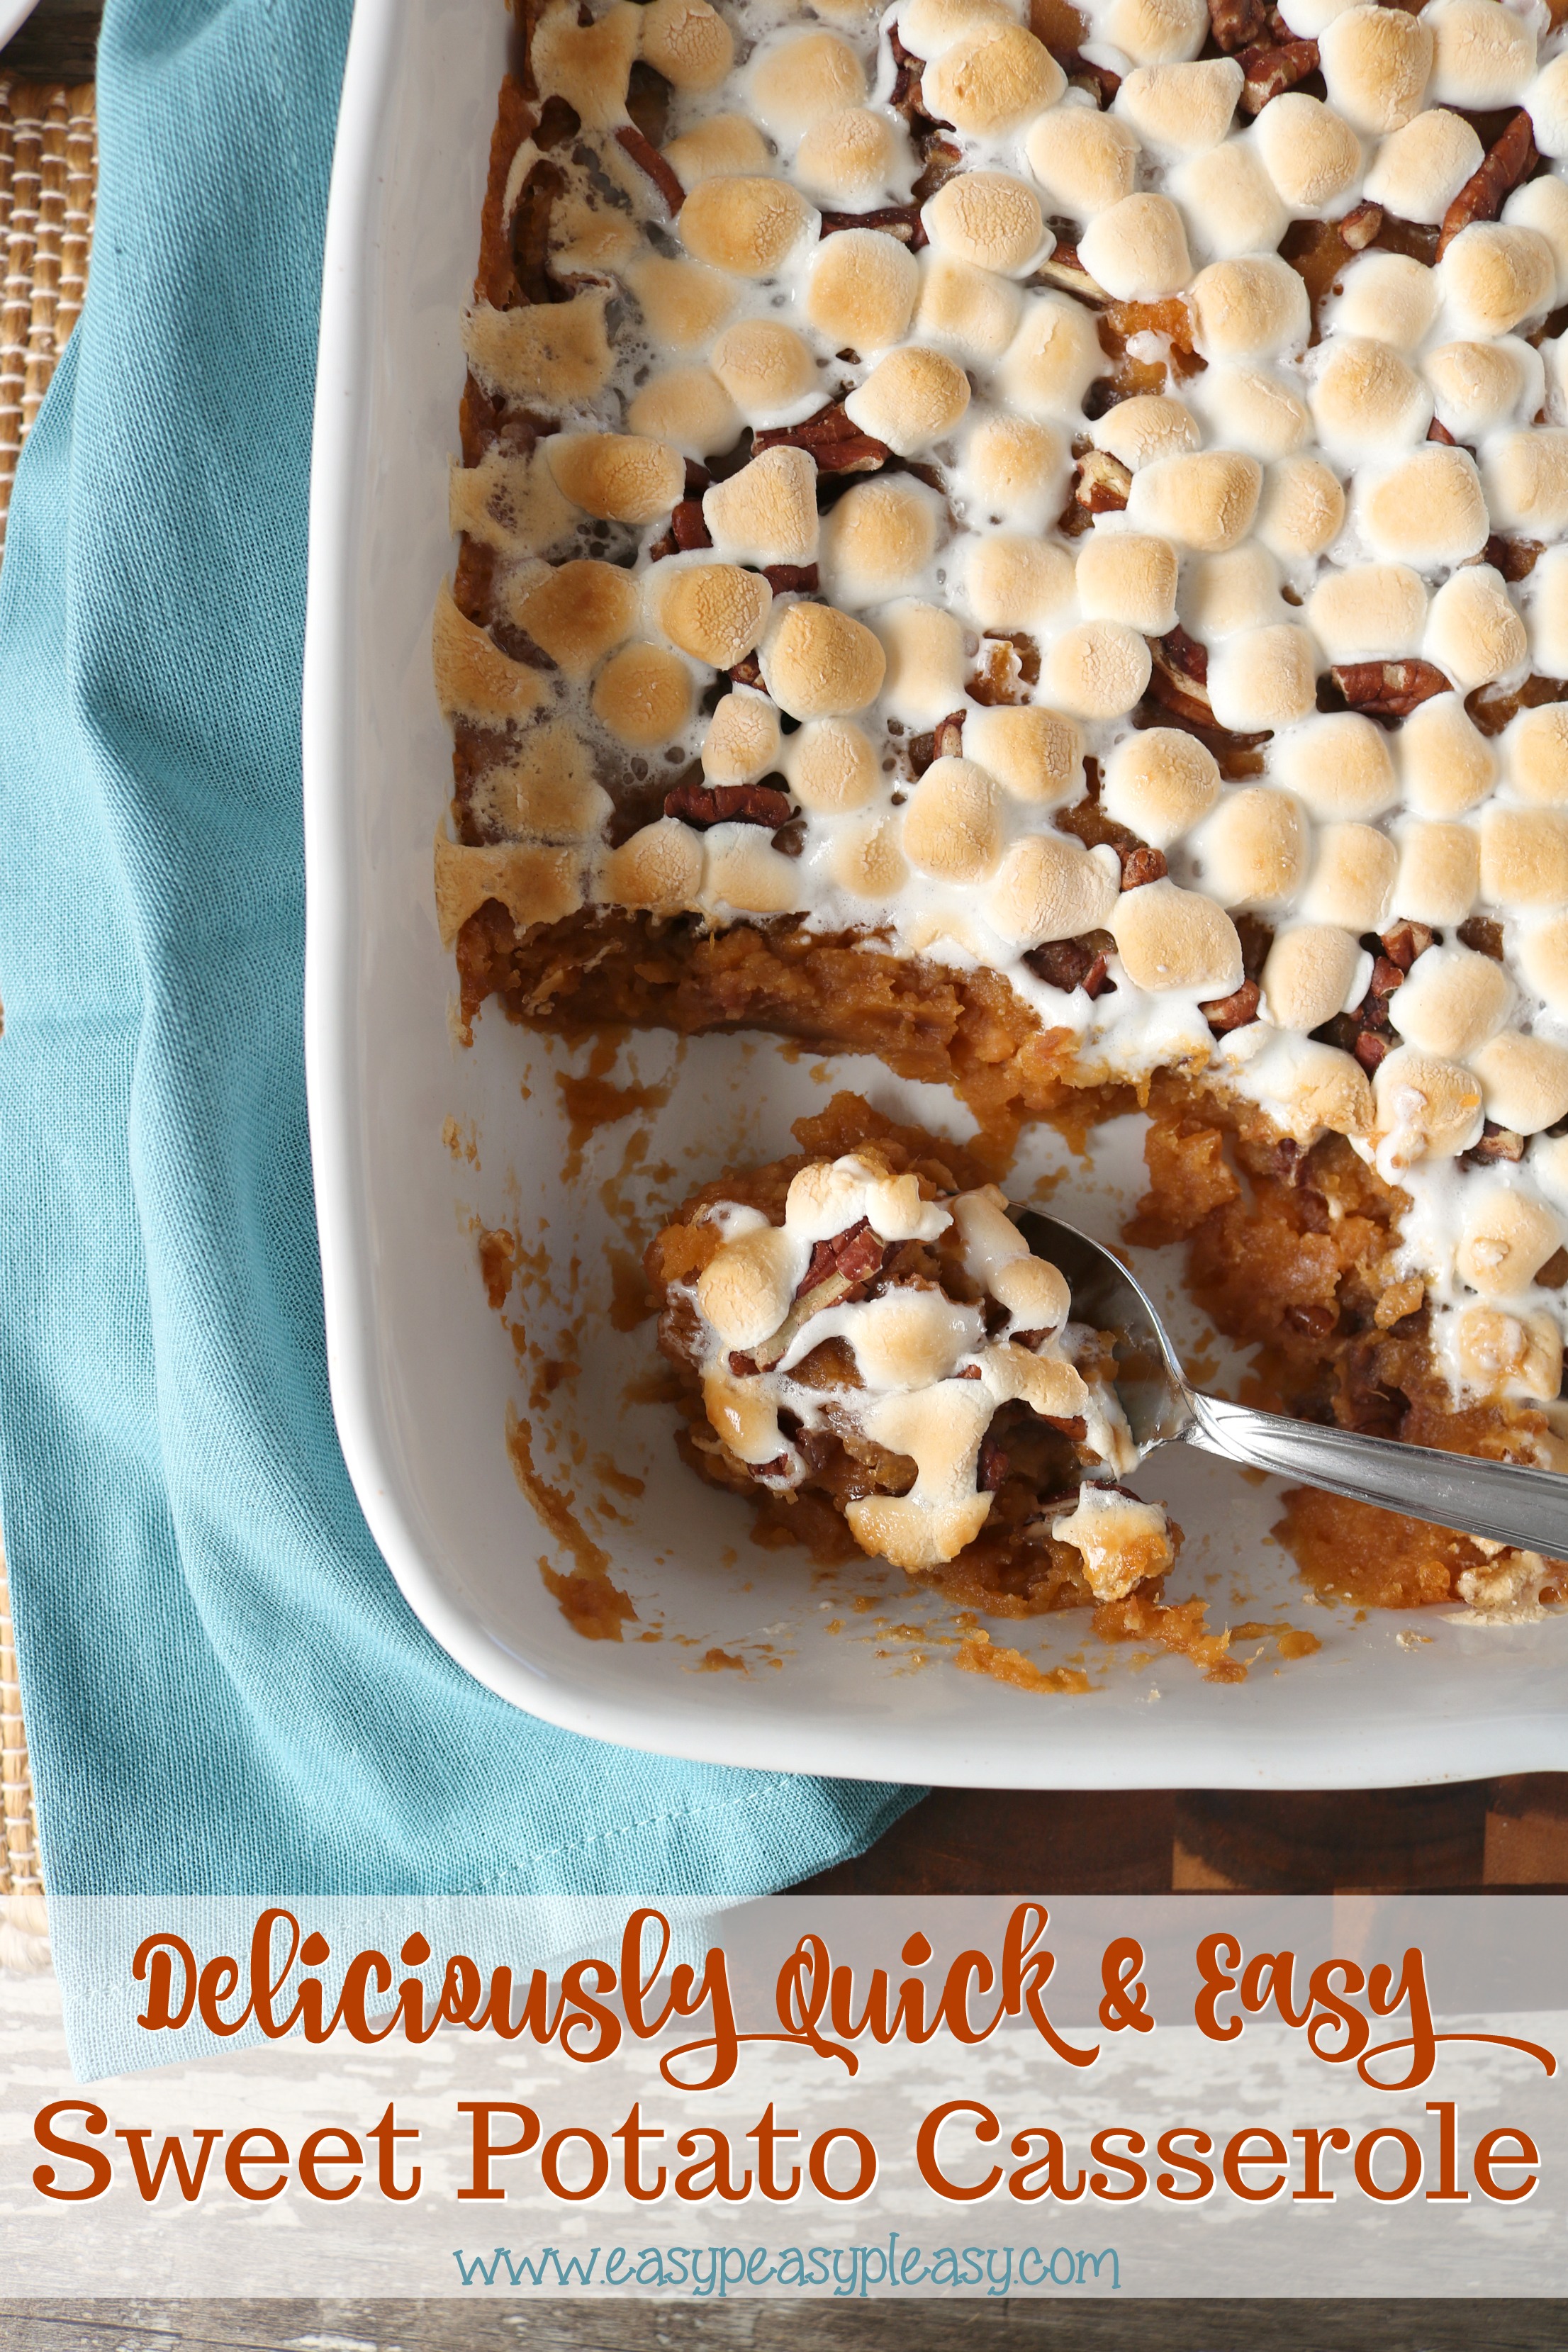 This easy Sweet Potato Casserole is making a new family tradition in my house...it's that good!